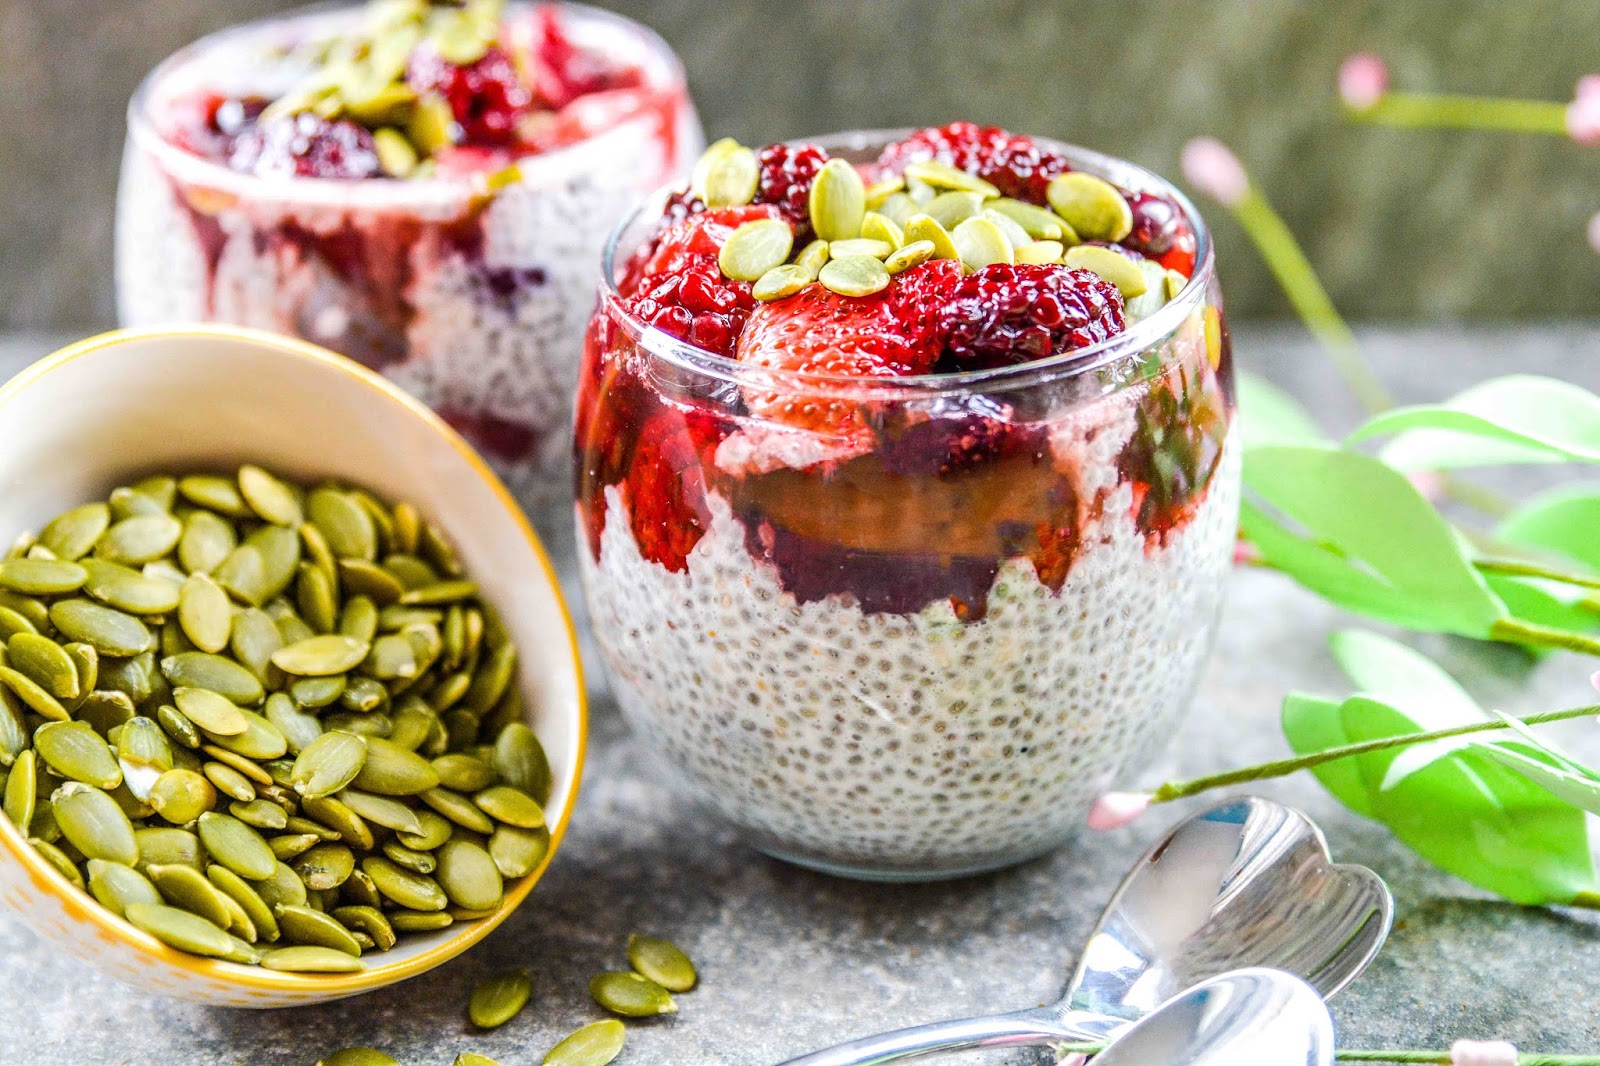 Roasted Berry Chia Pudding